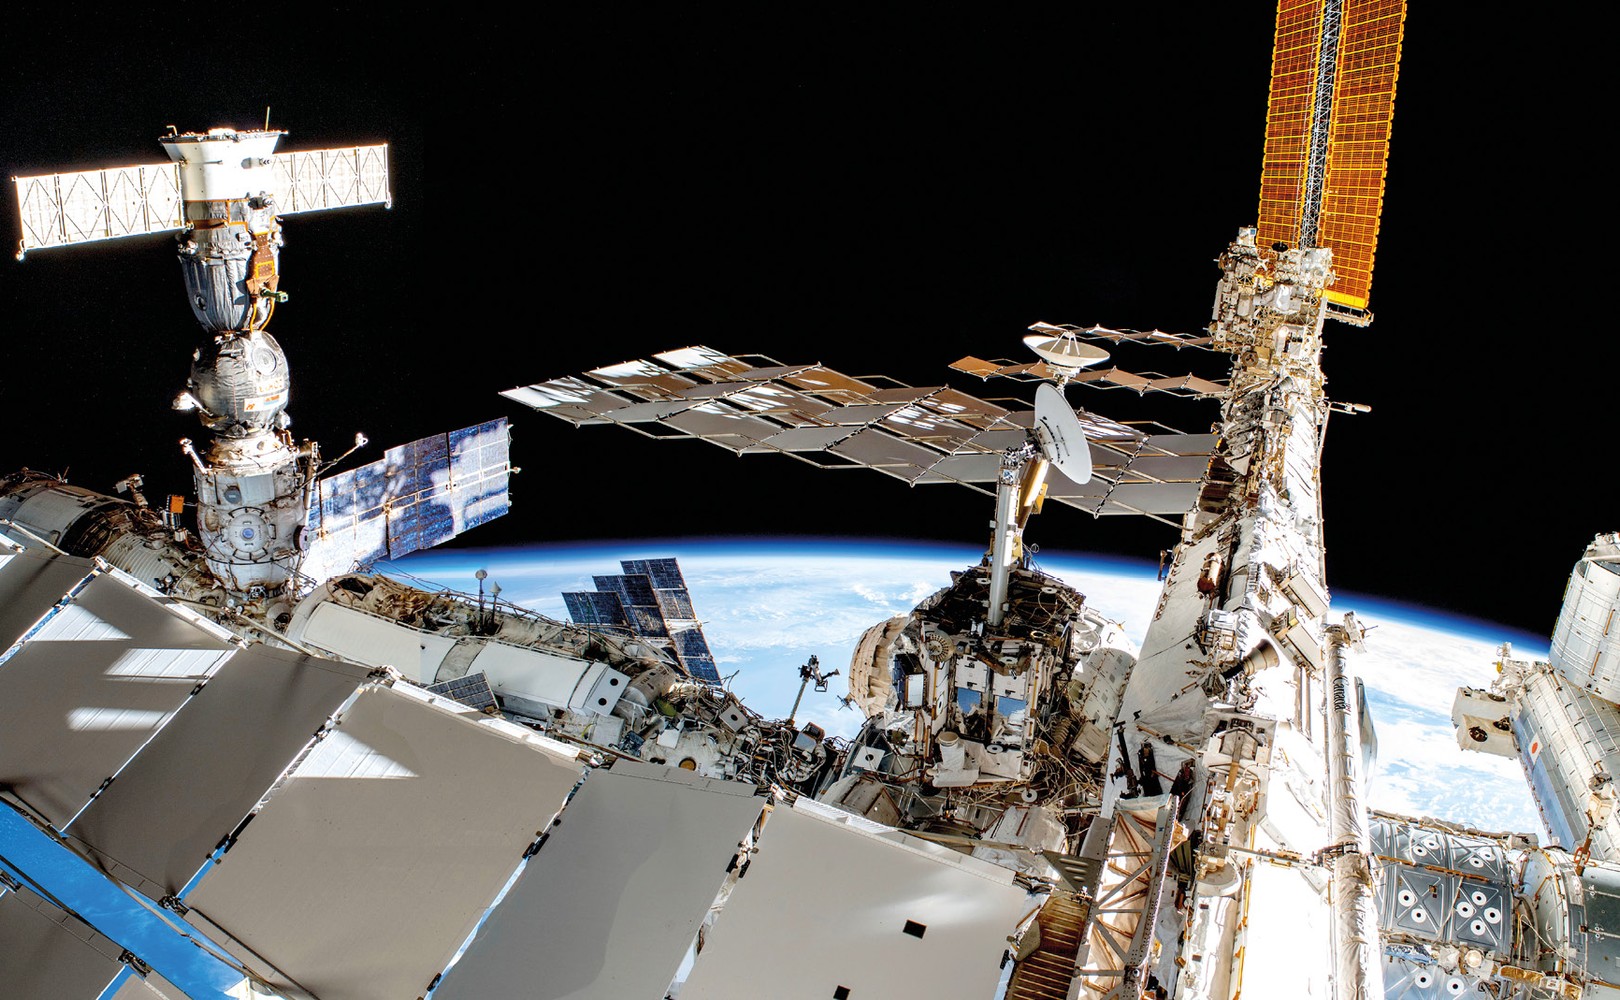 The International Space Station will amaze us with discoveries by the end of the decade